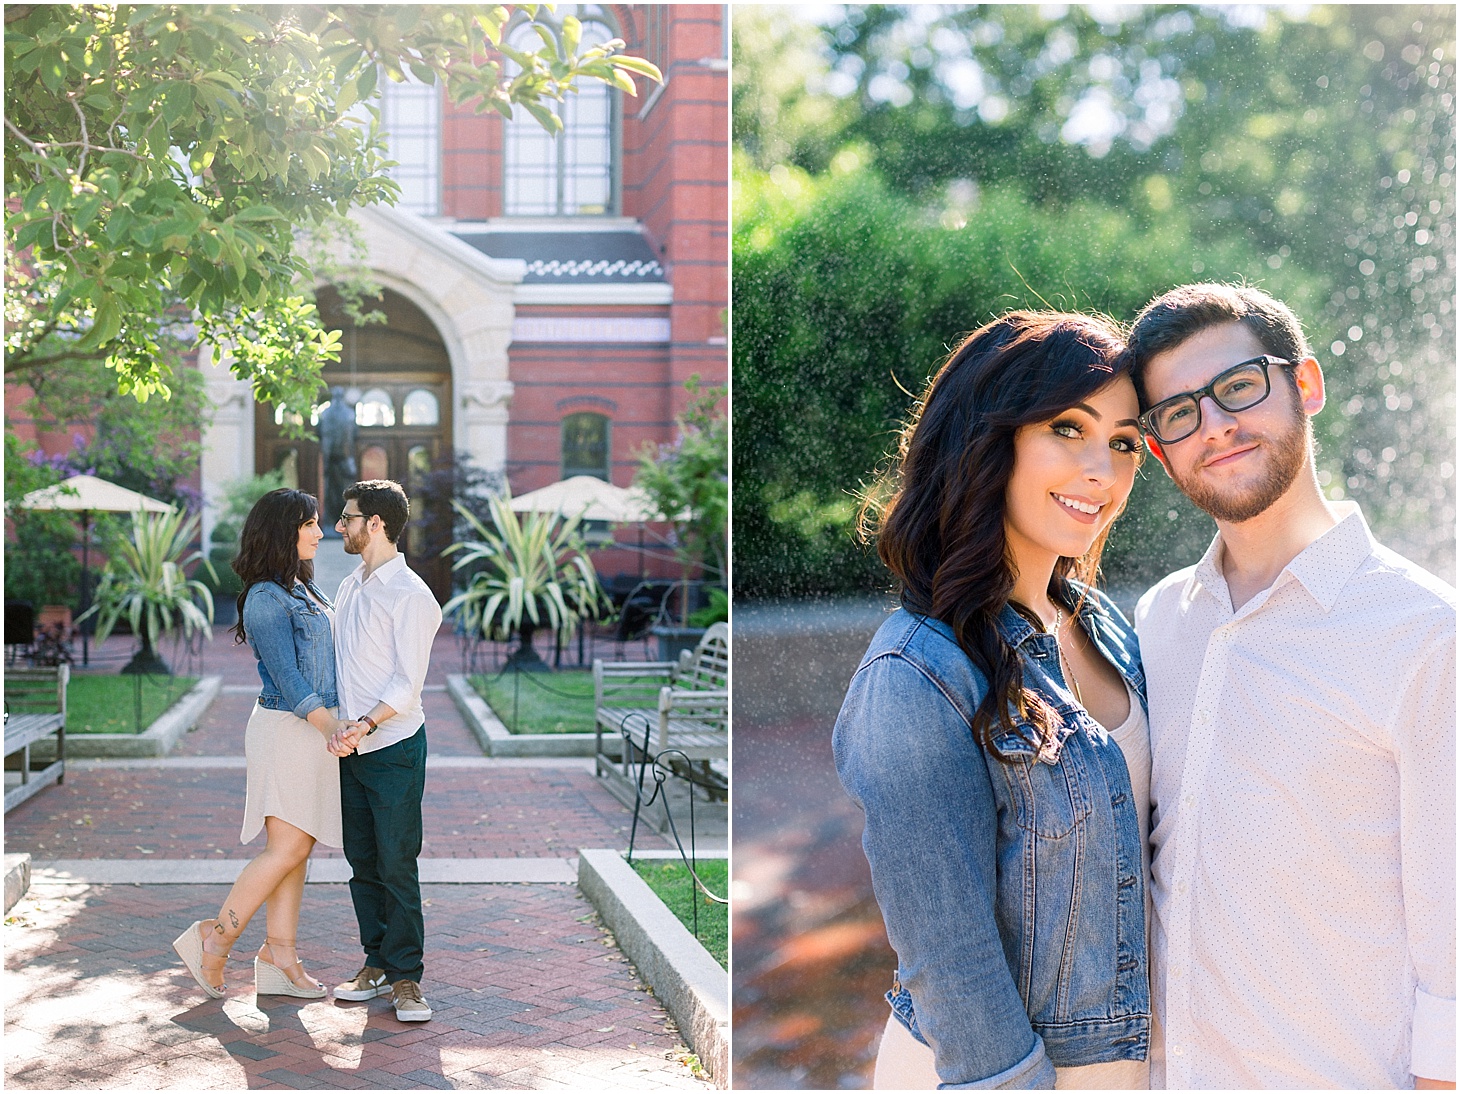 Engagement Portraits at the Smithsonian Gardens | Romantic Sunrise Engagement Session at the Smithsonian Gardens | Sarah Bradshaw Photography